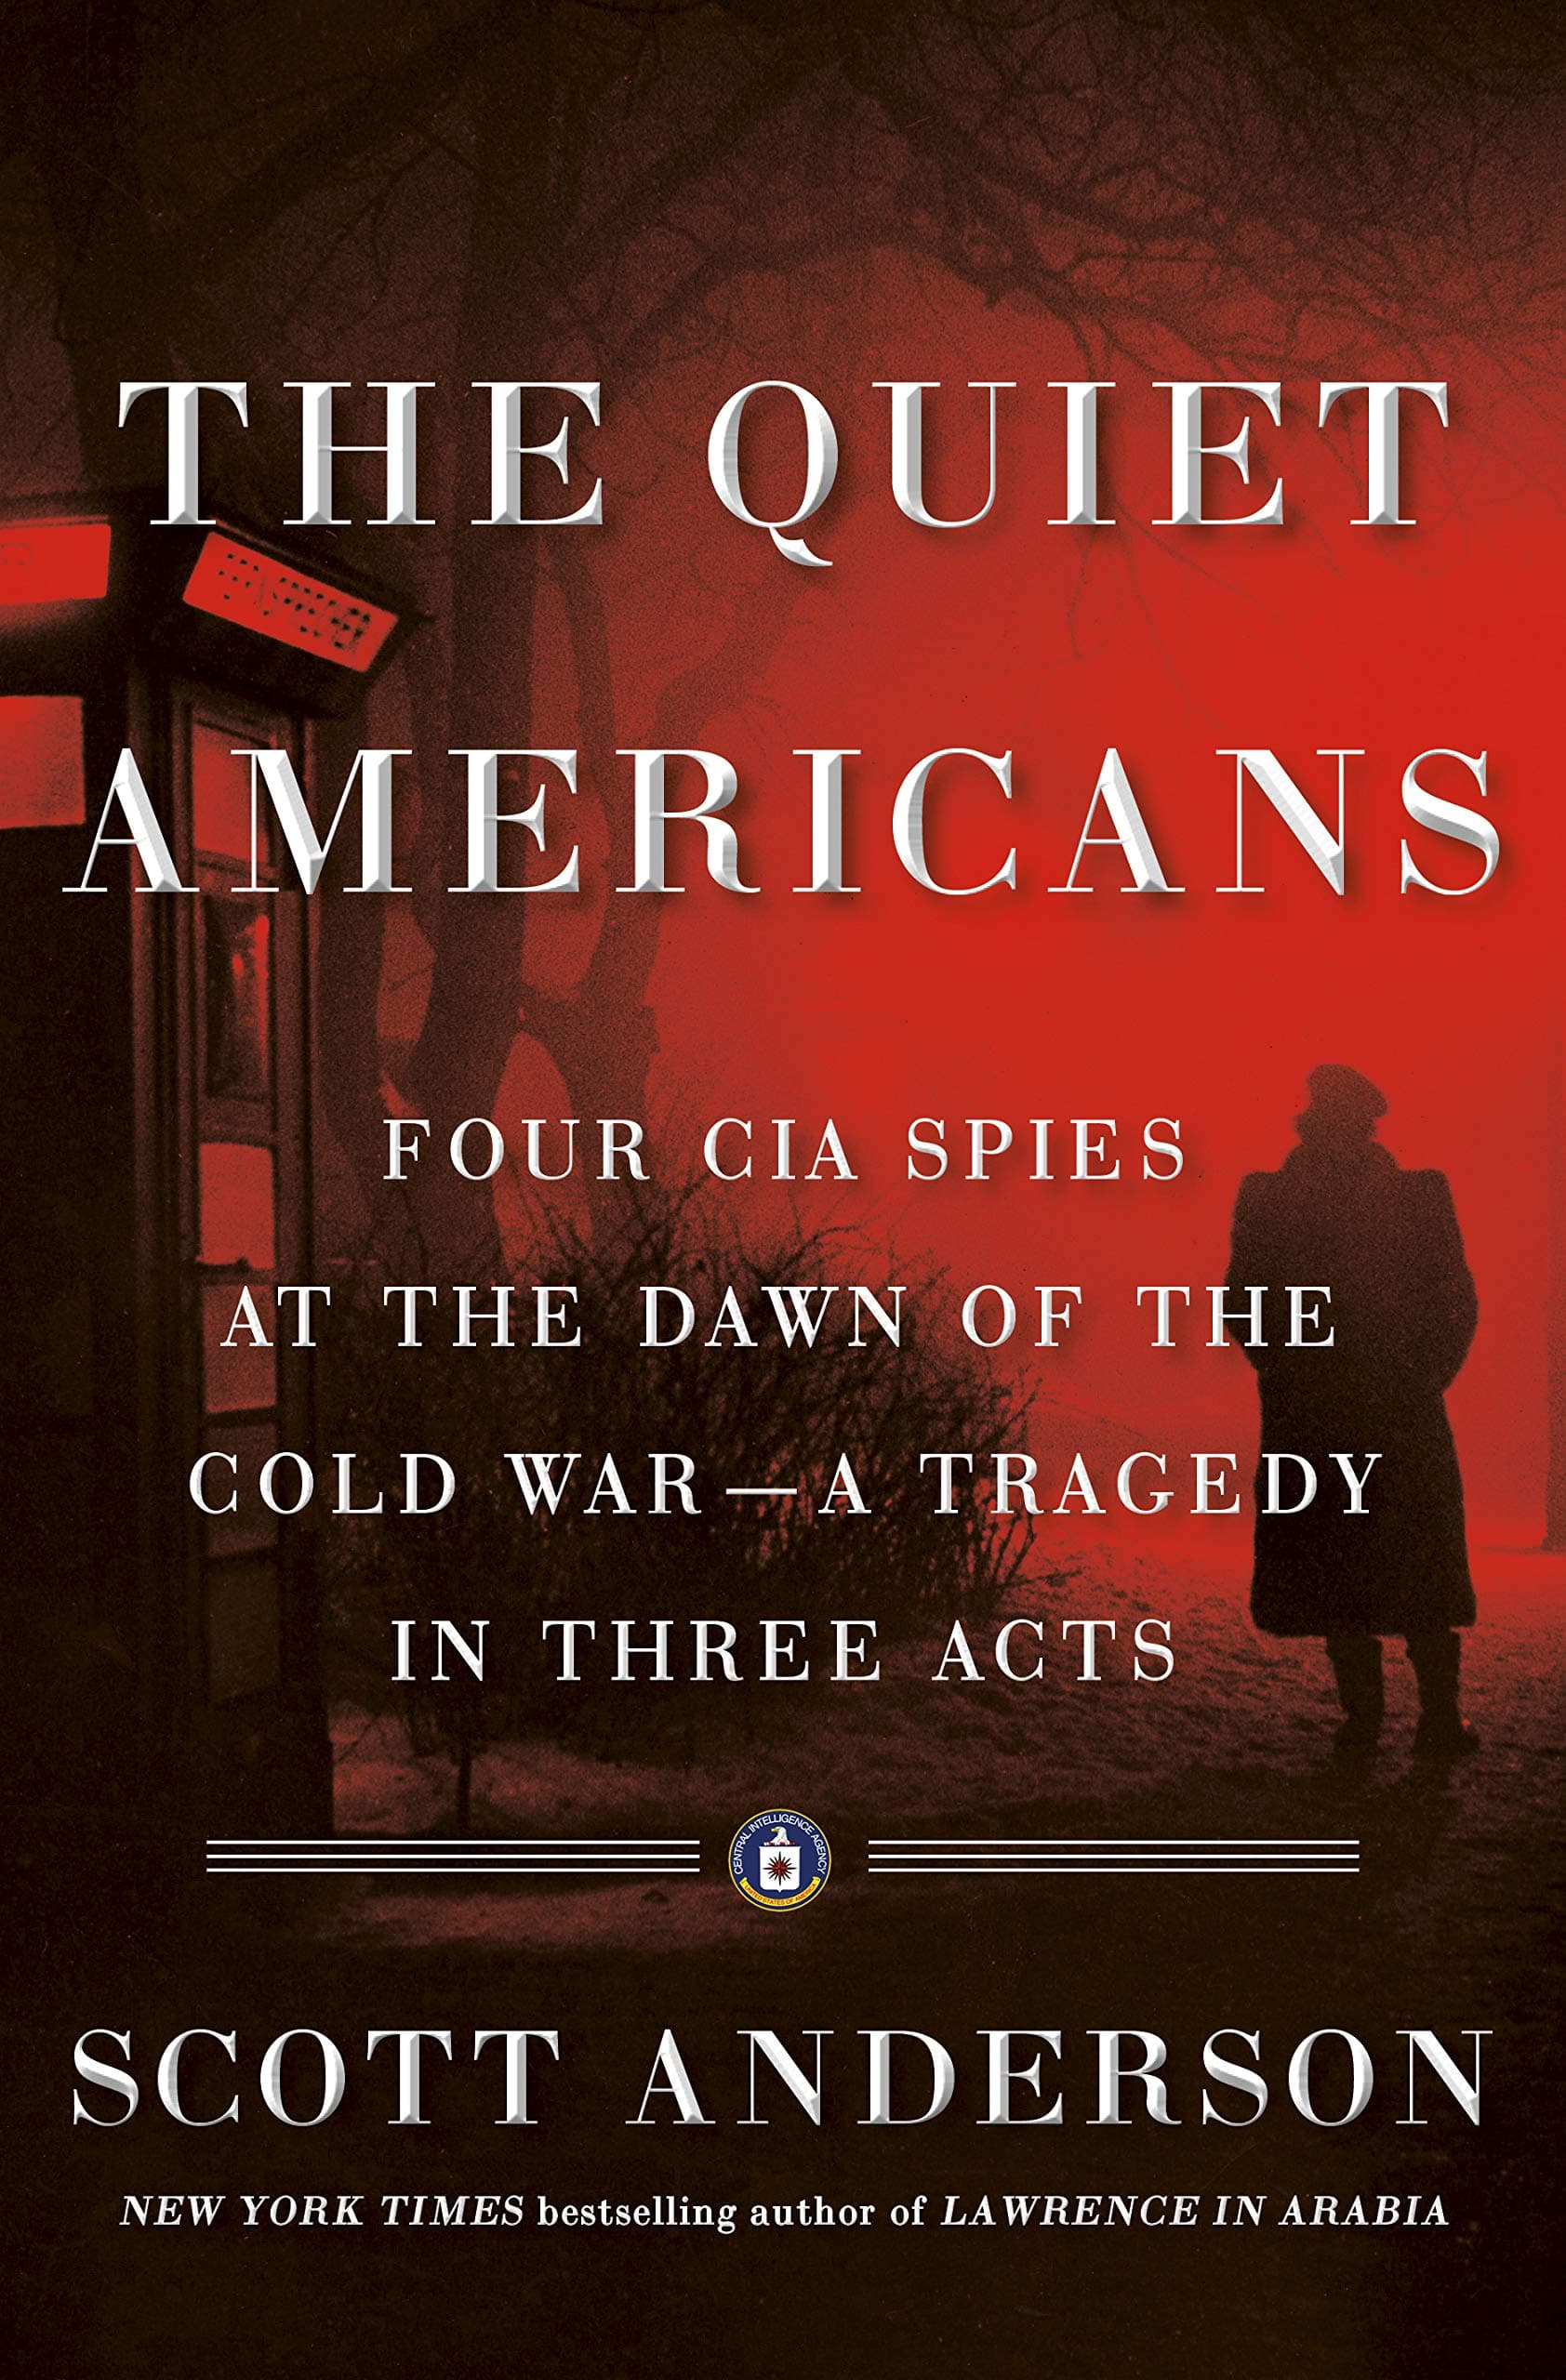 The cover of The Quiet Americans